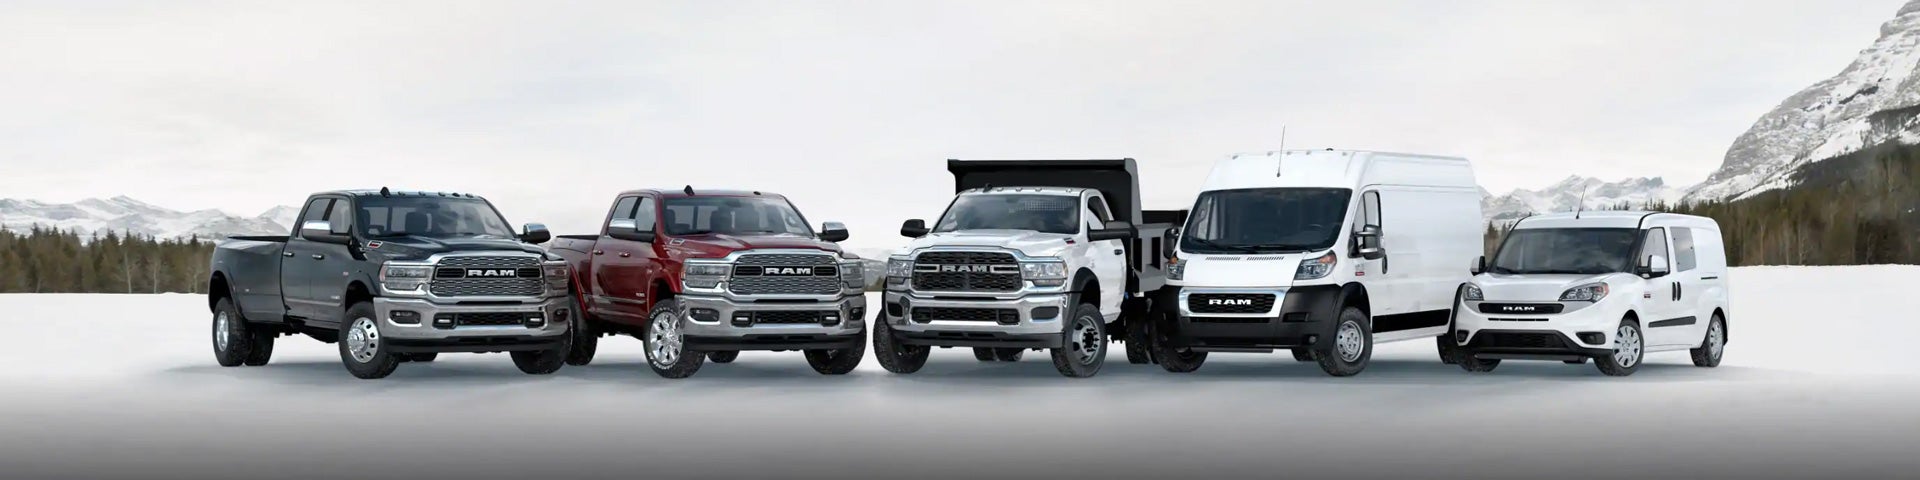 RAM Commercial Vehicles Near You